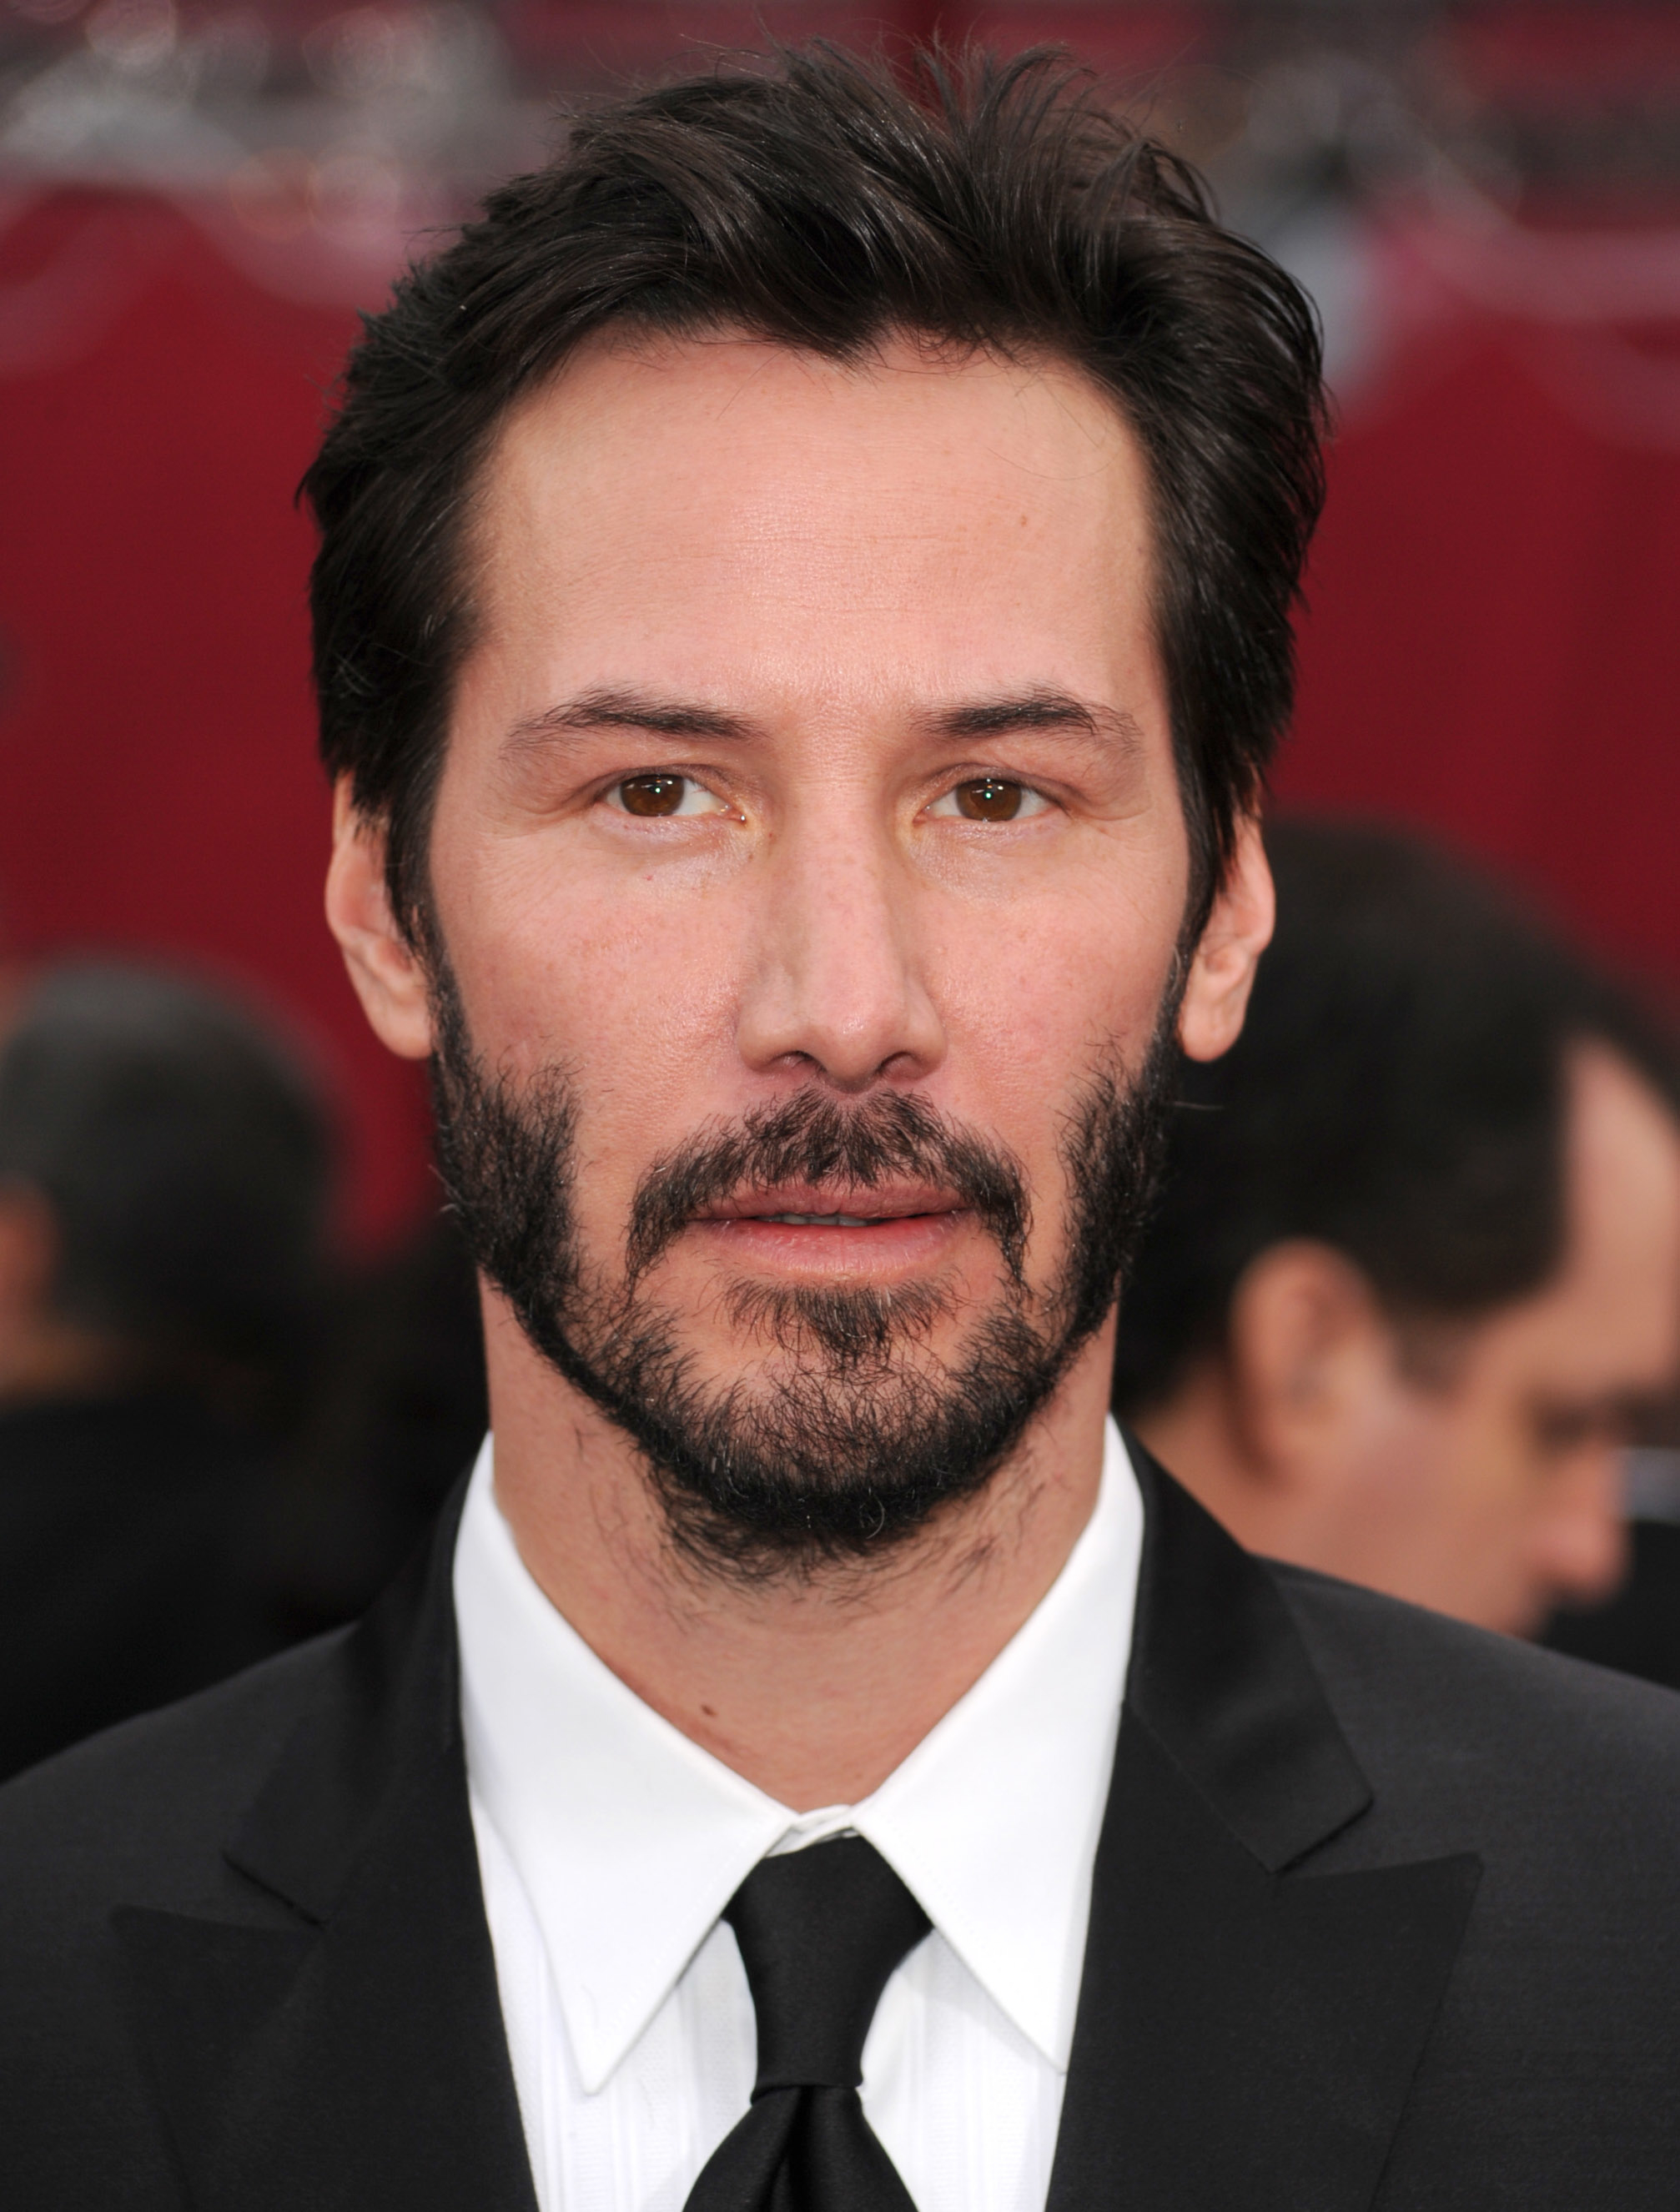 Keanu in a black suit and tie on a red carpet